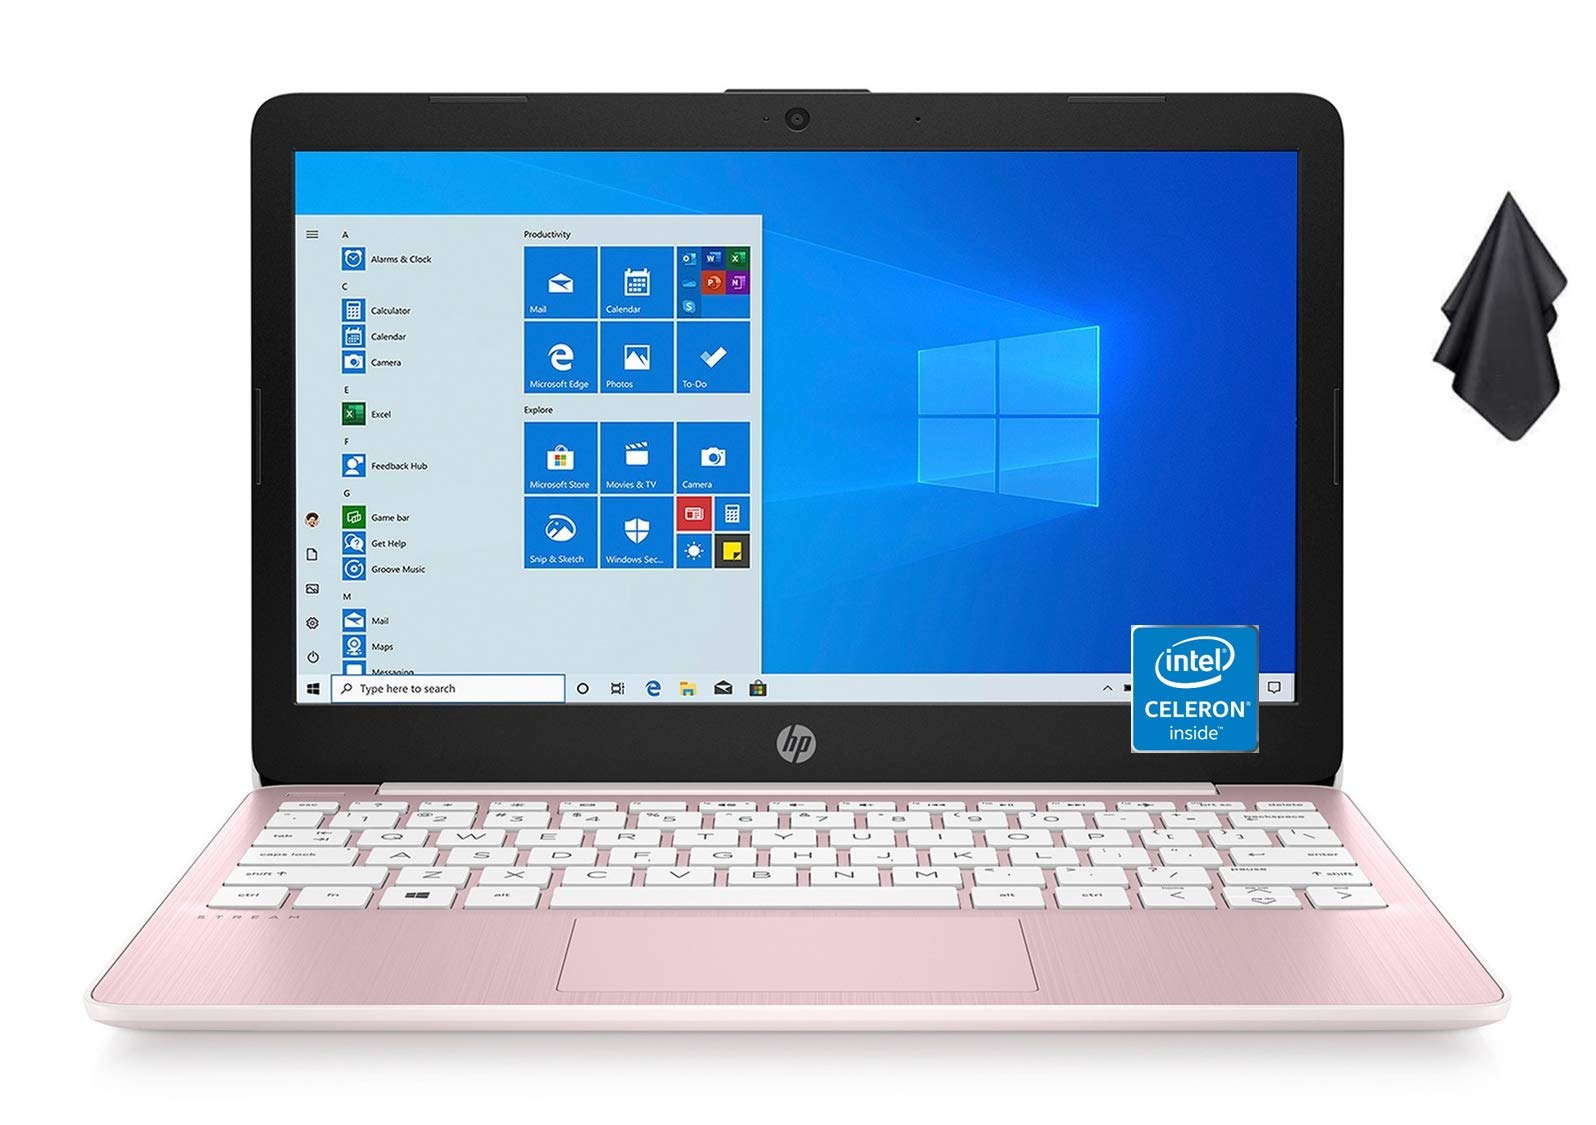 2021 Newest HP Stream 11.6-inch HD Laptop, Intel Celeron N4020, 4GB RAM, 64GB emmc, Windows 10 Home in S Mode with Office 365 Personal for 1 Year, Rose Pink